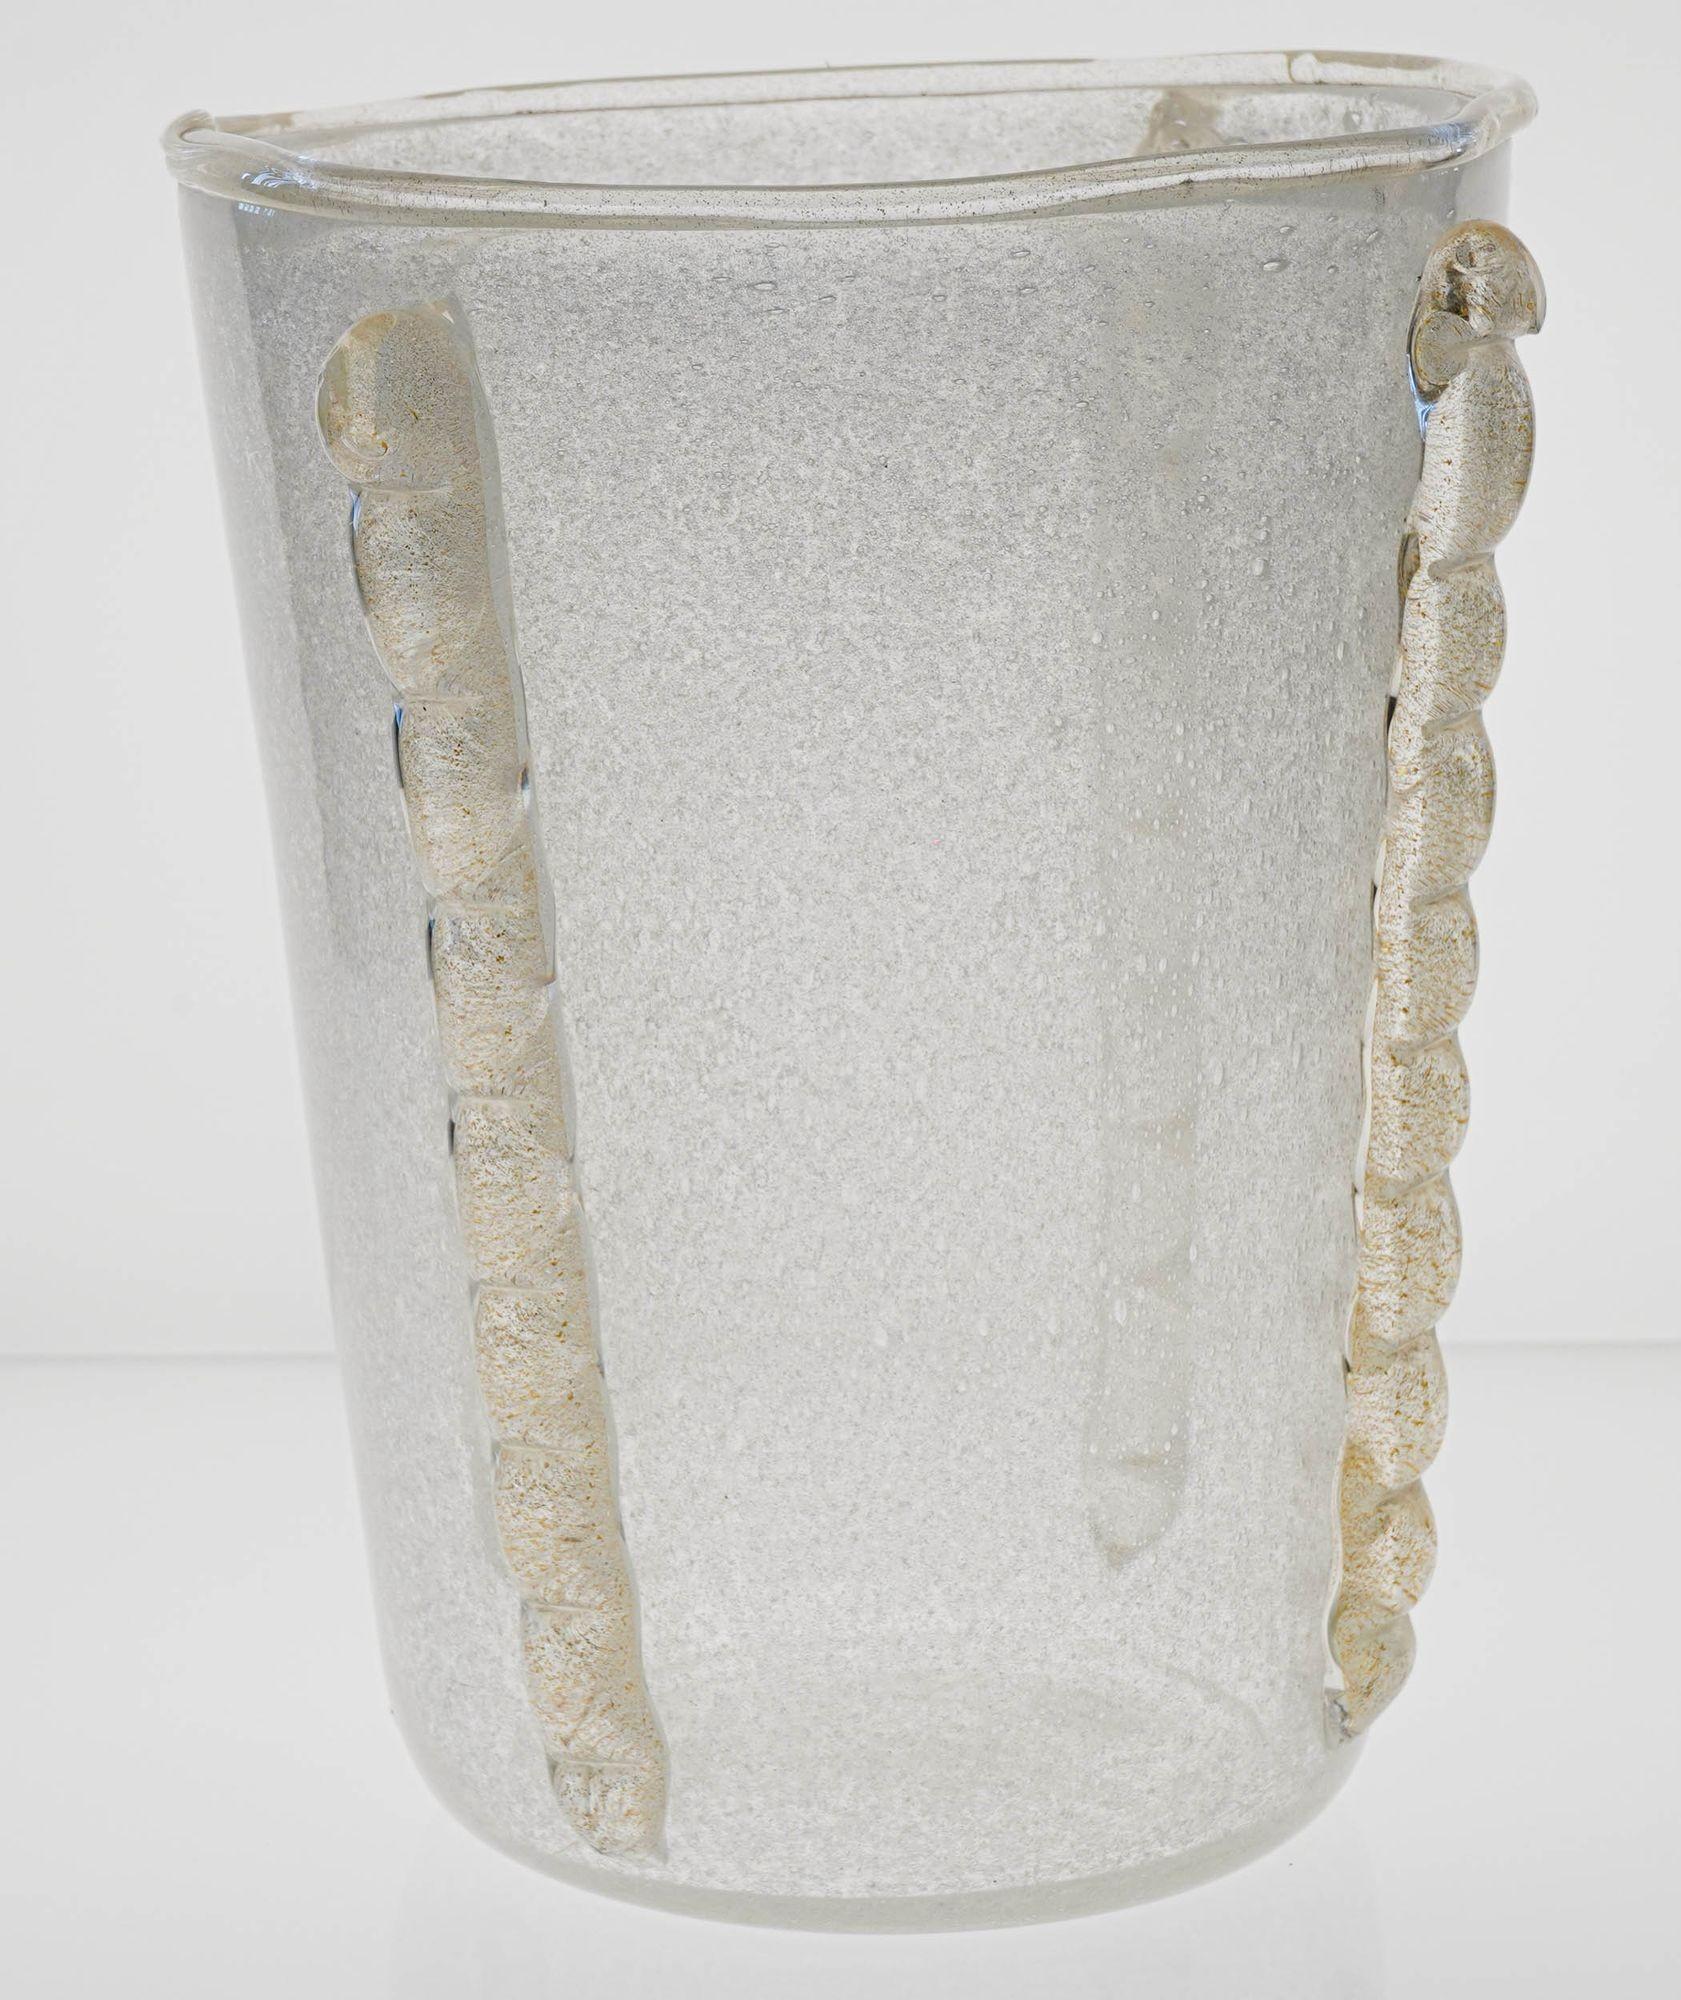 Very large vase in Puligoso glass with four vertical applications Morise with 24K gold leaf embedded.
The Puligoso finish is extremely well executed with small bubbles allover the glass body.
I believe it was made to be a luxury Ice Bucket as it